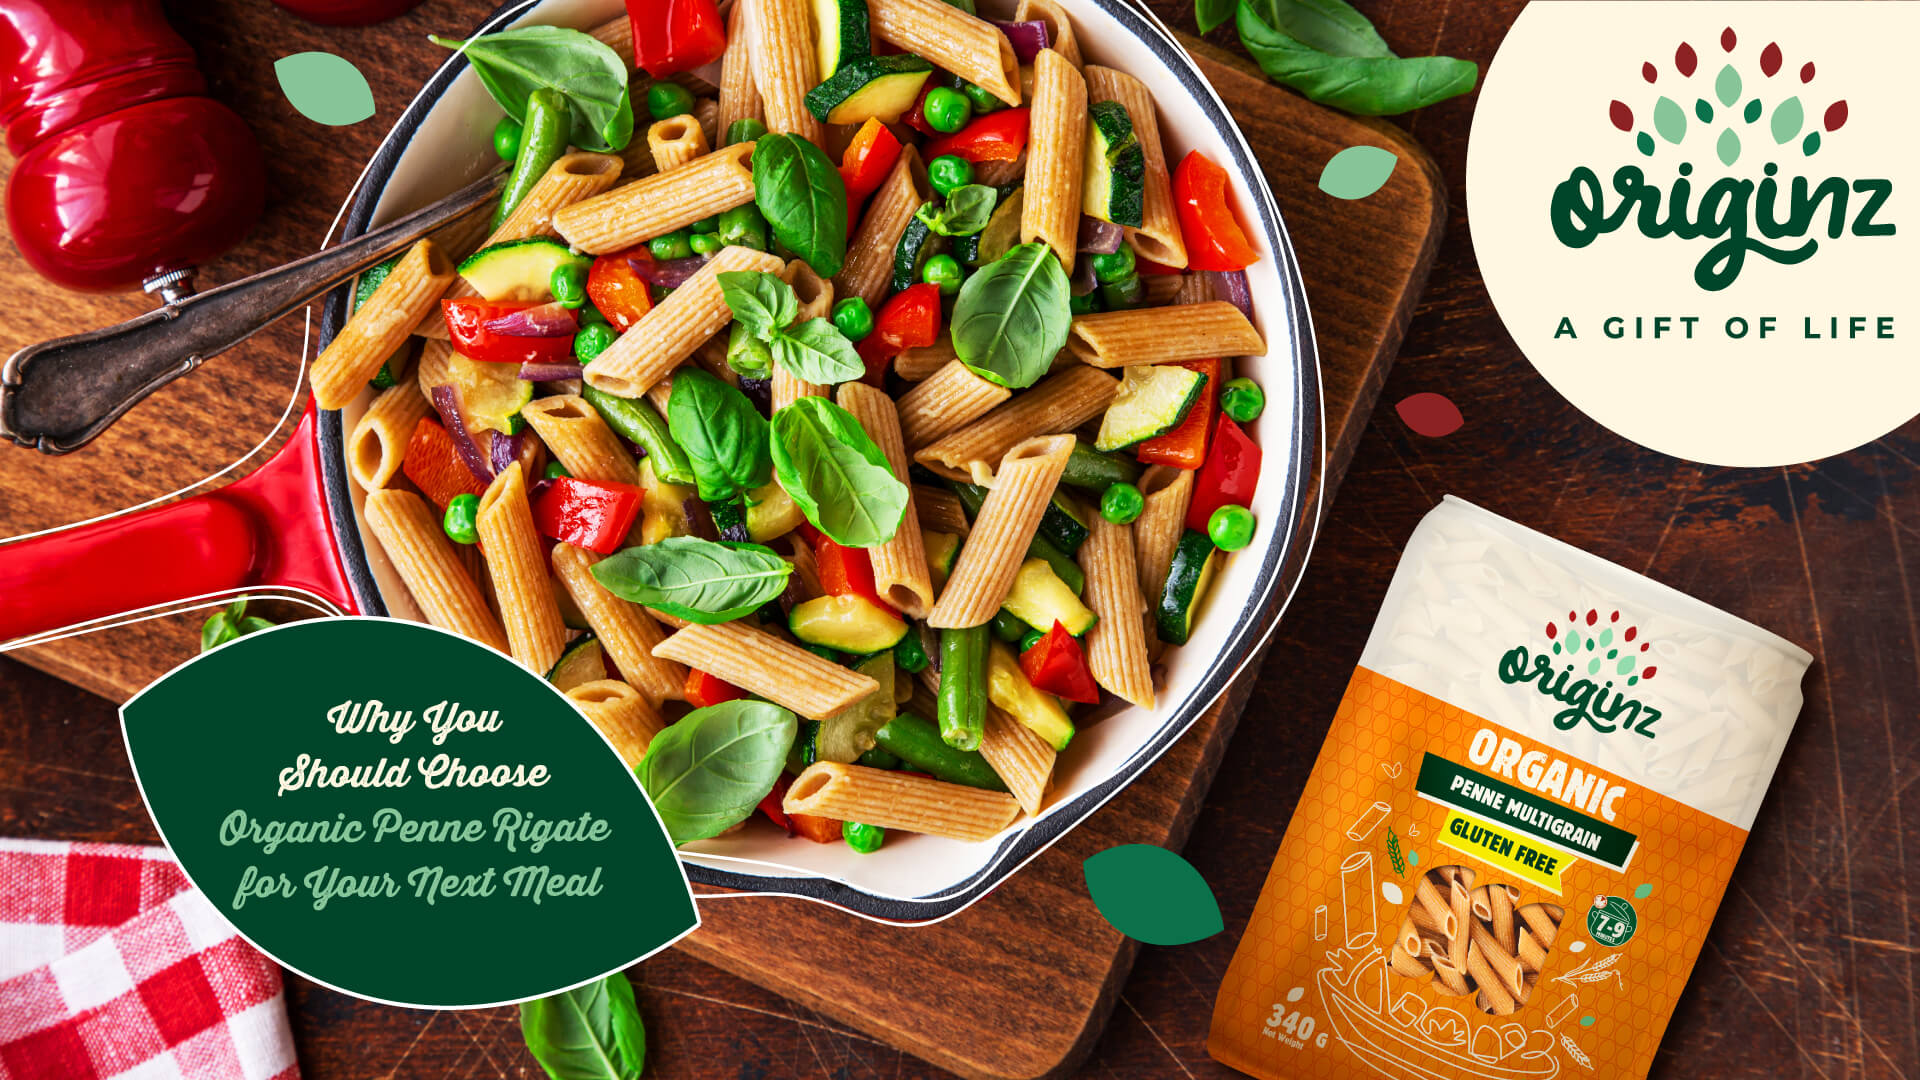 Why You Should Choose Organic Penne Rigate for Your Next Meal